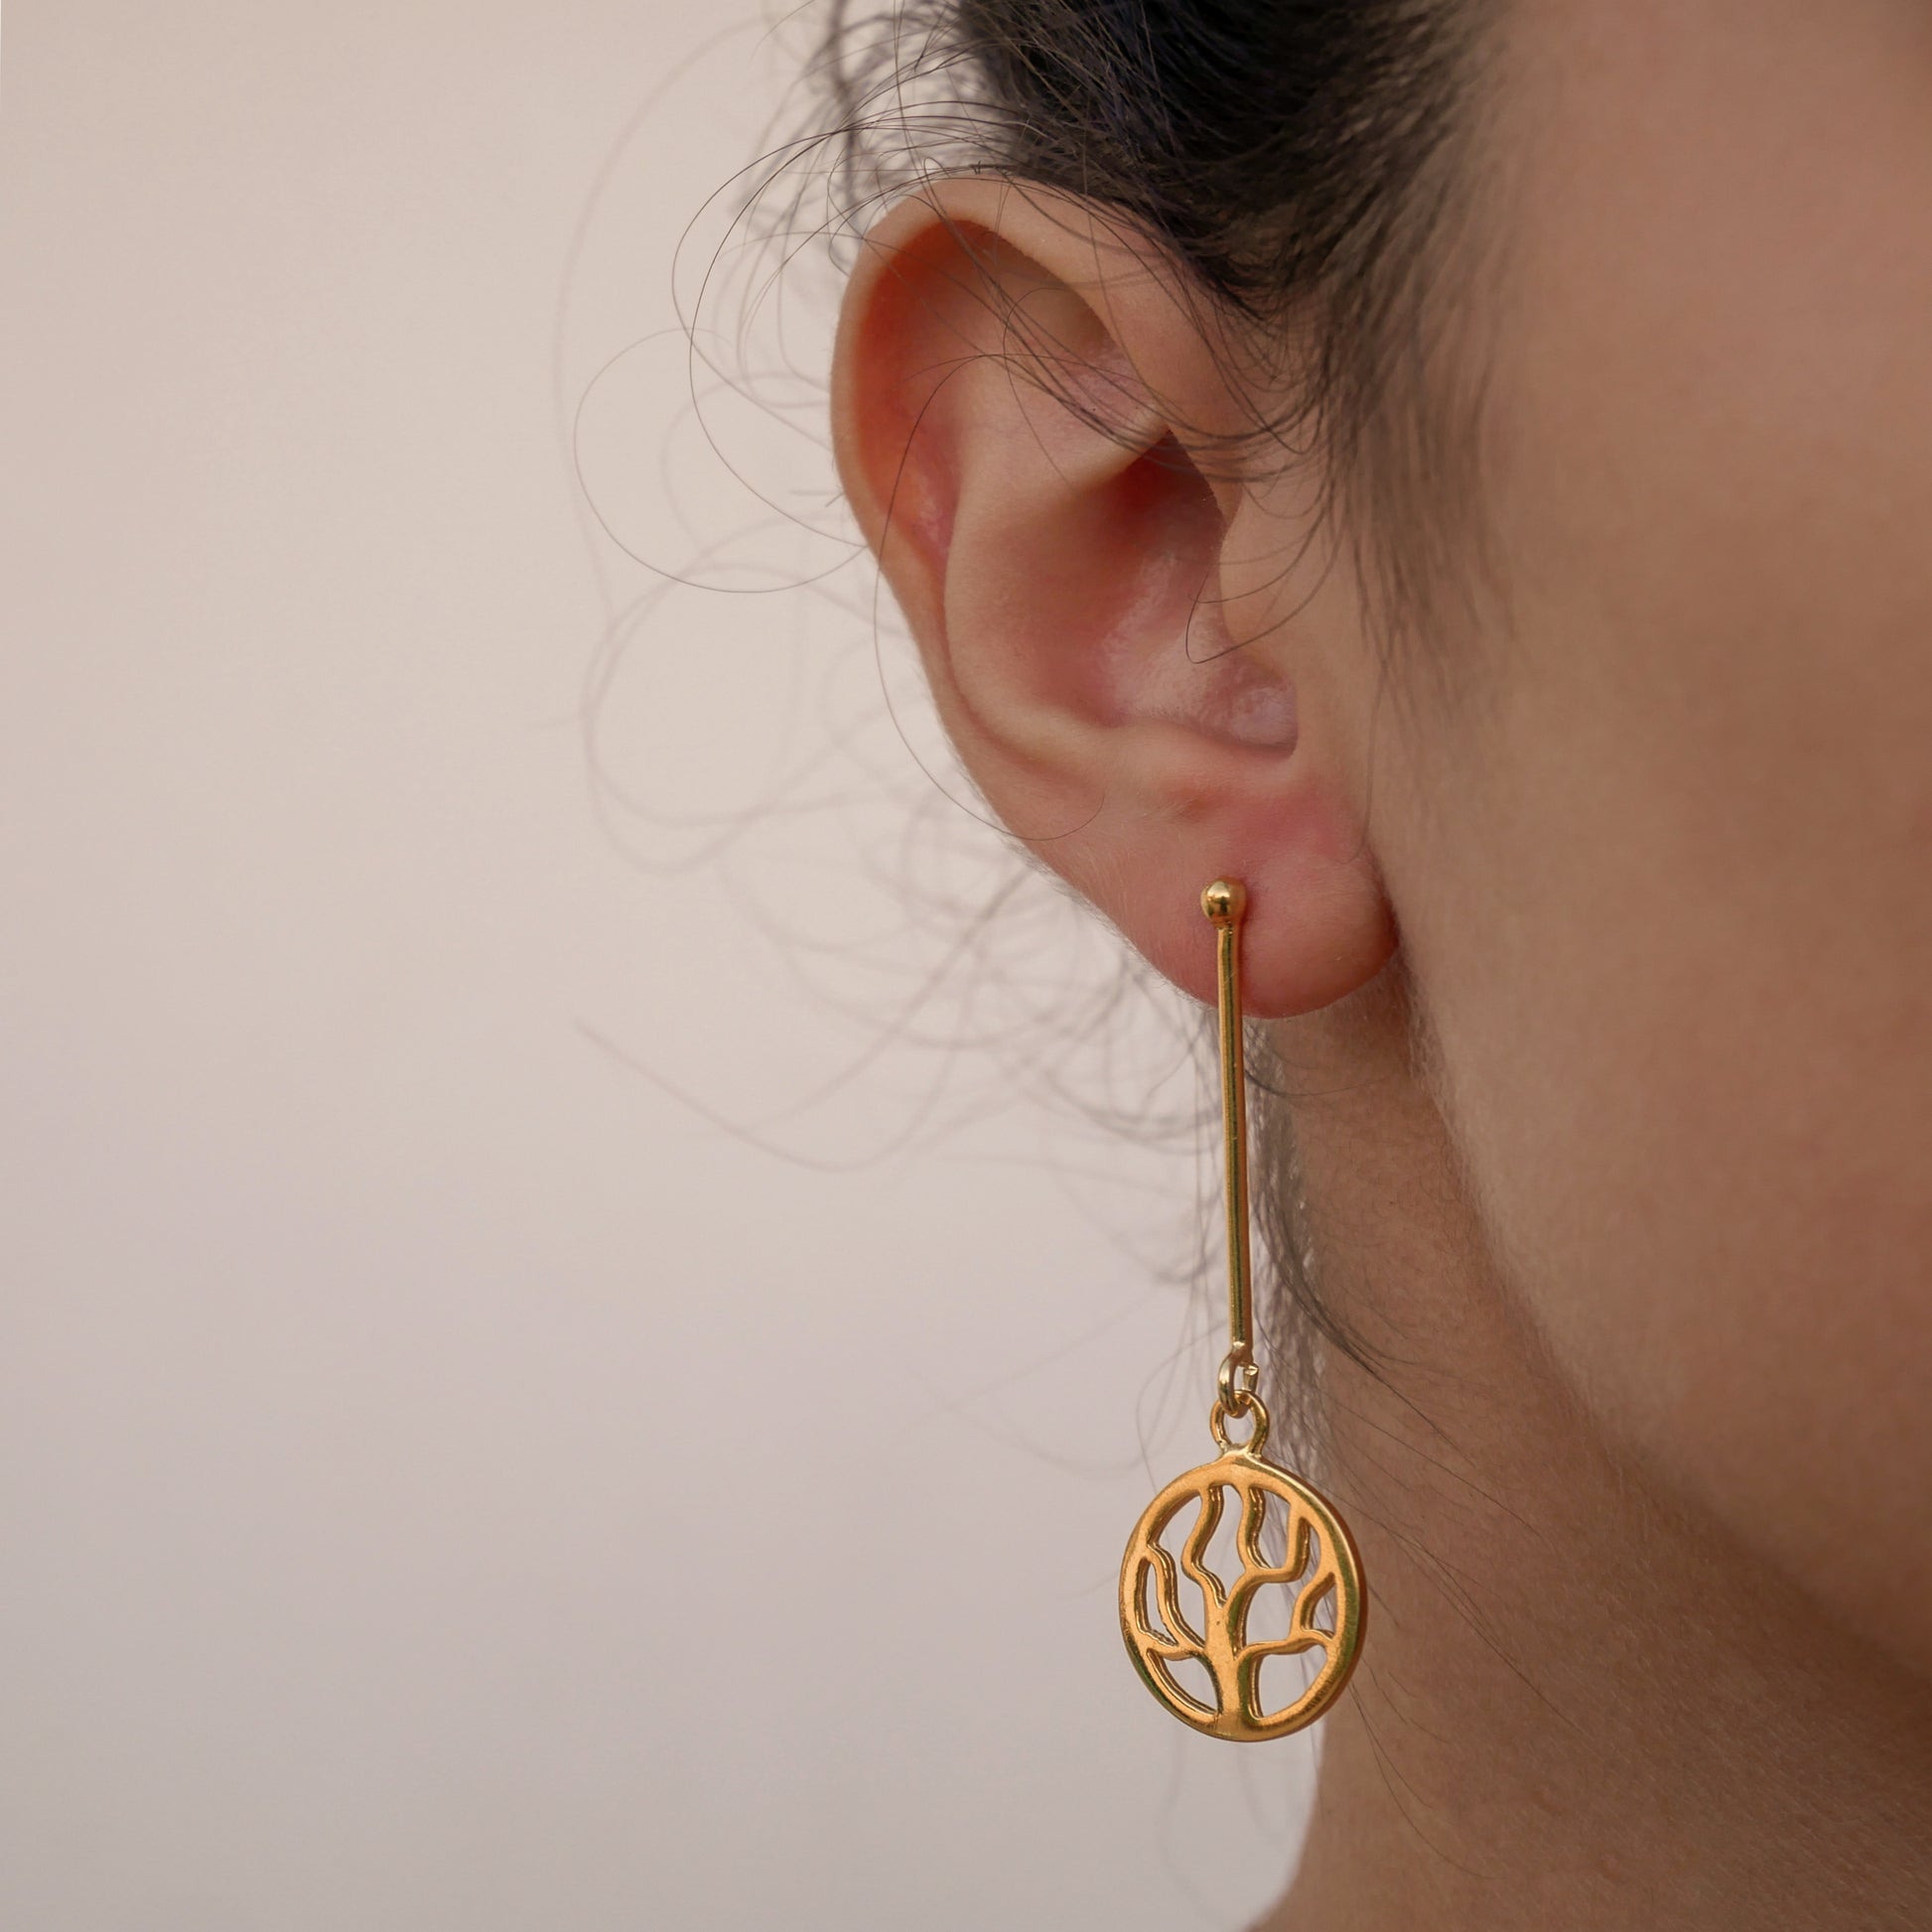 “Earrings made of  gold plated silver.They are constacted with a thick  vertikal wire and beneath the wire hangs a round design with the small round  tree without leaves and flowers. The design is perforated and elegant.”